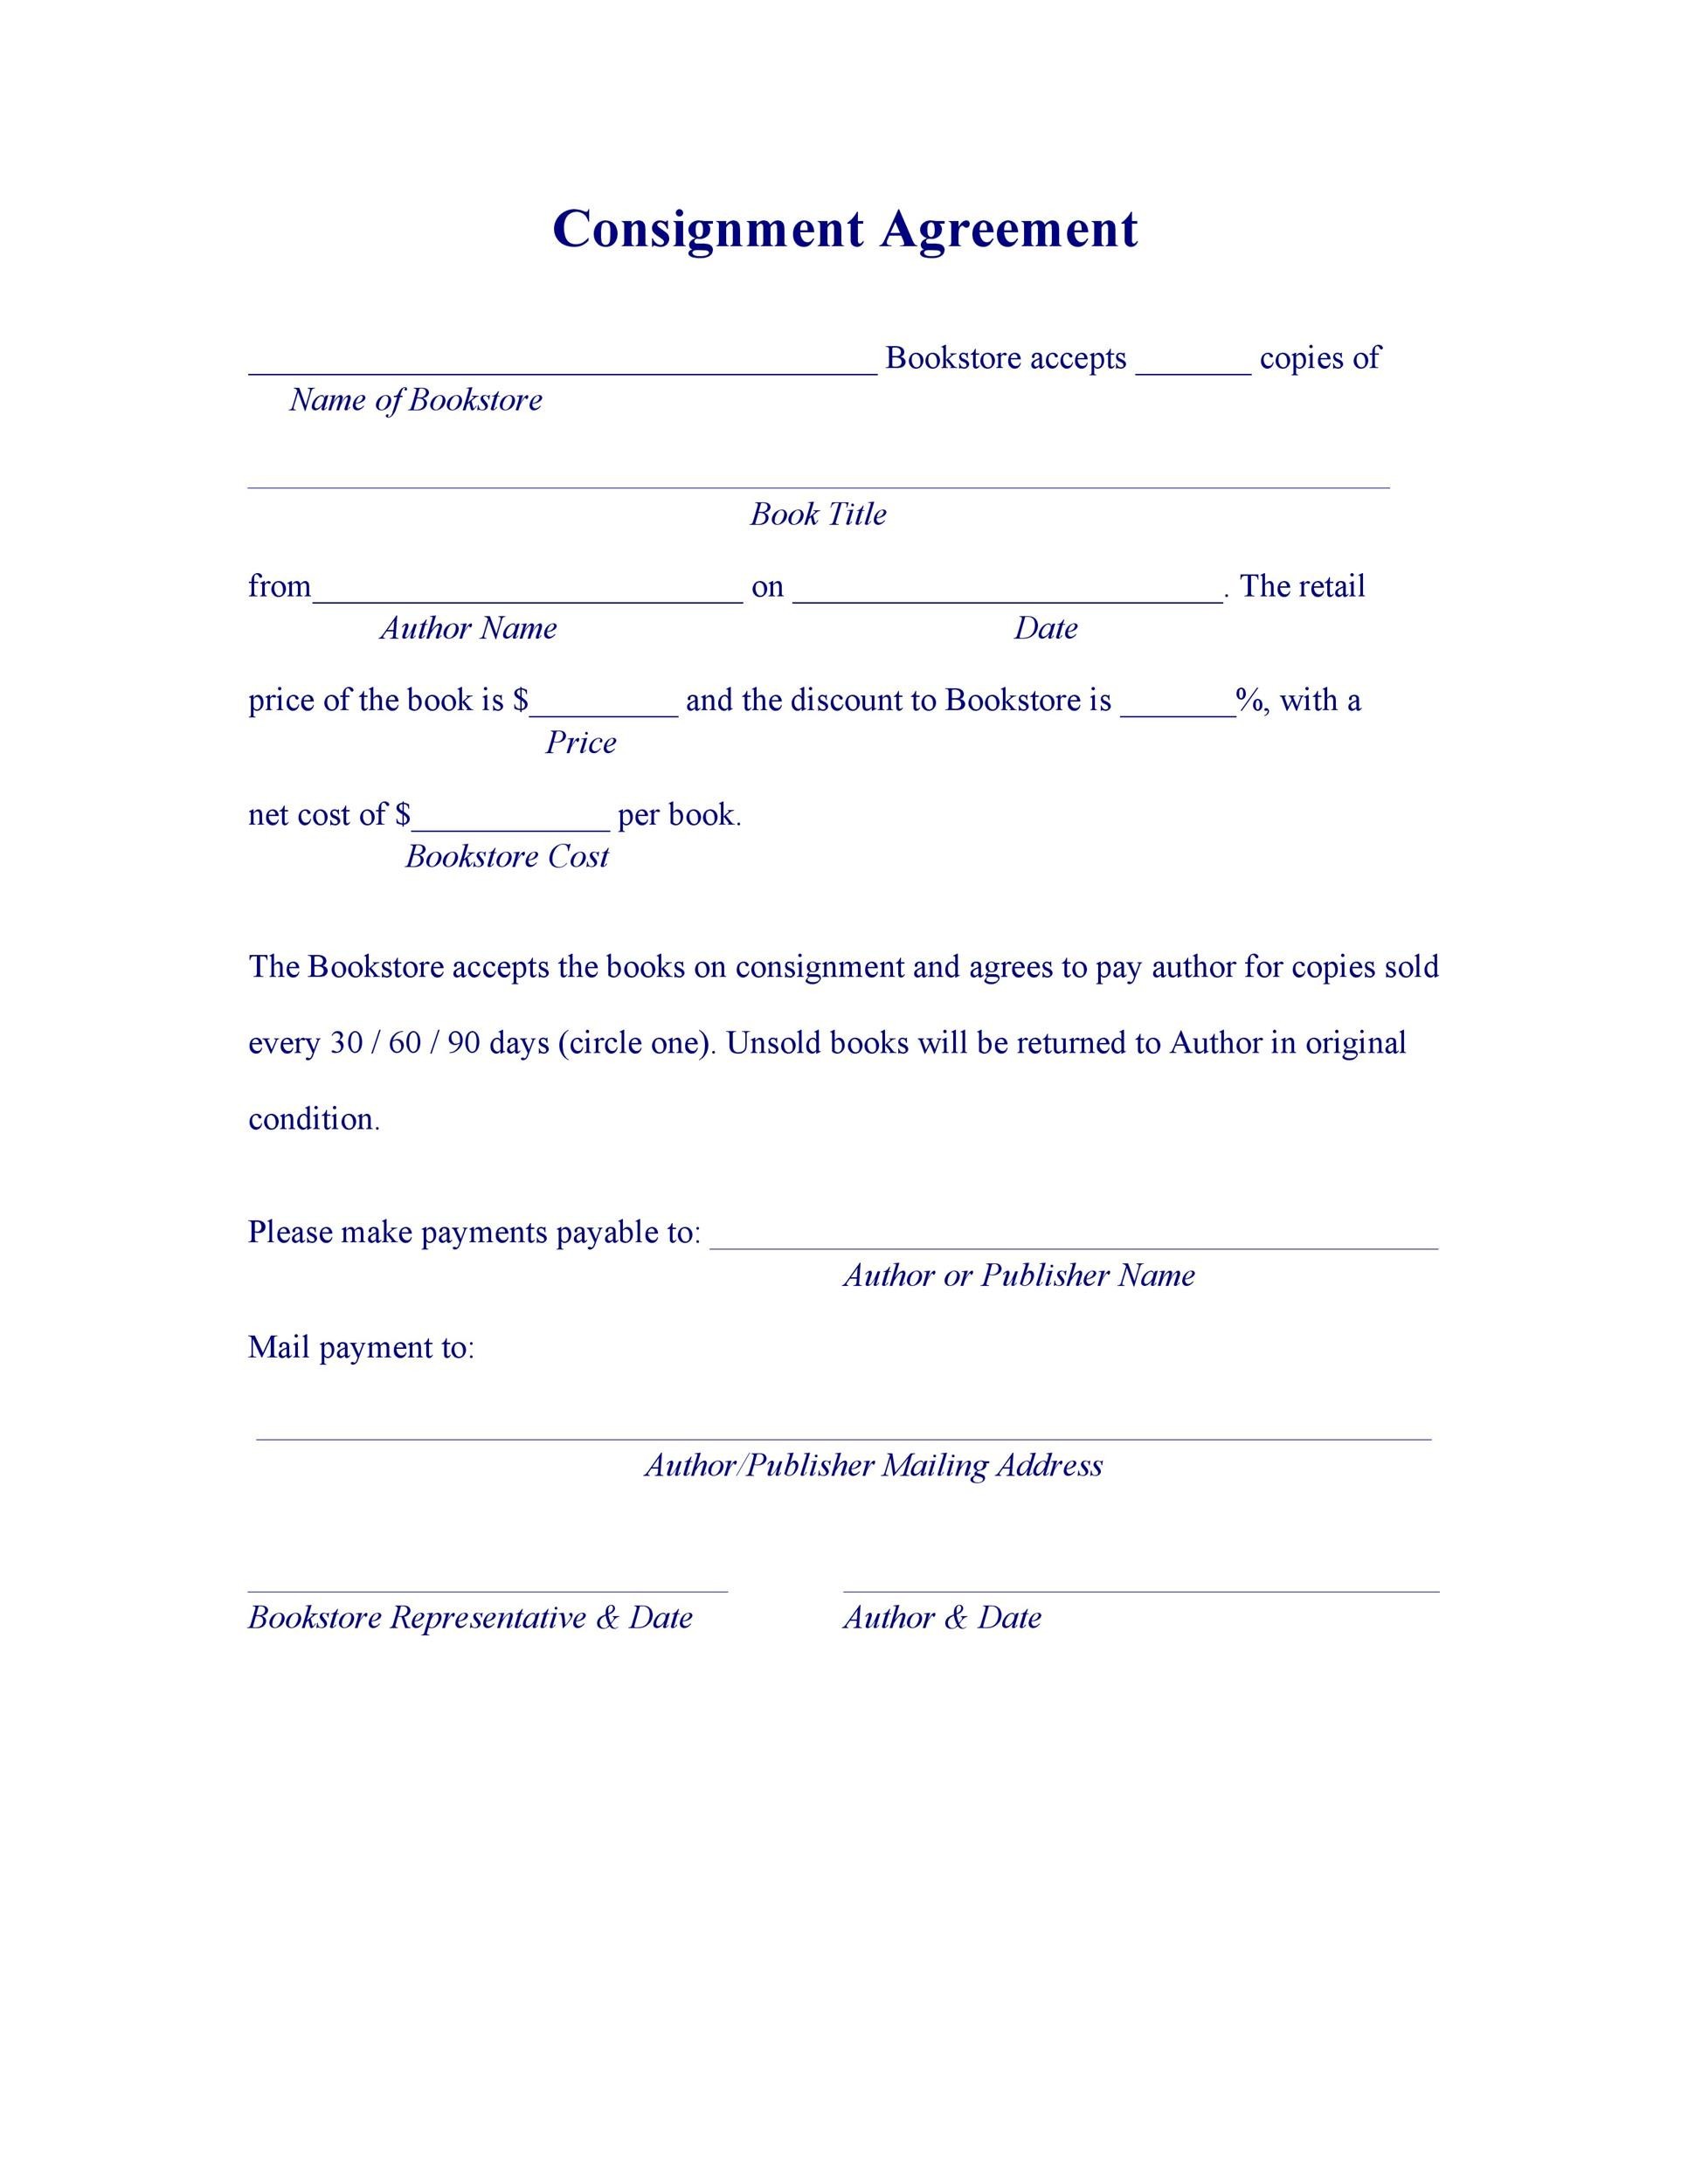 Free Printable Consignment Contract Master of Documents